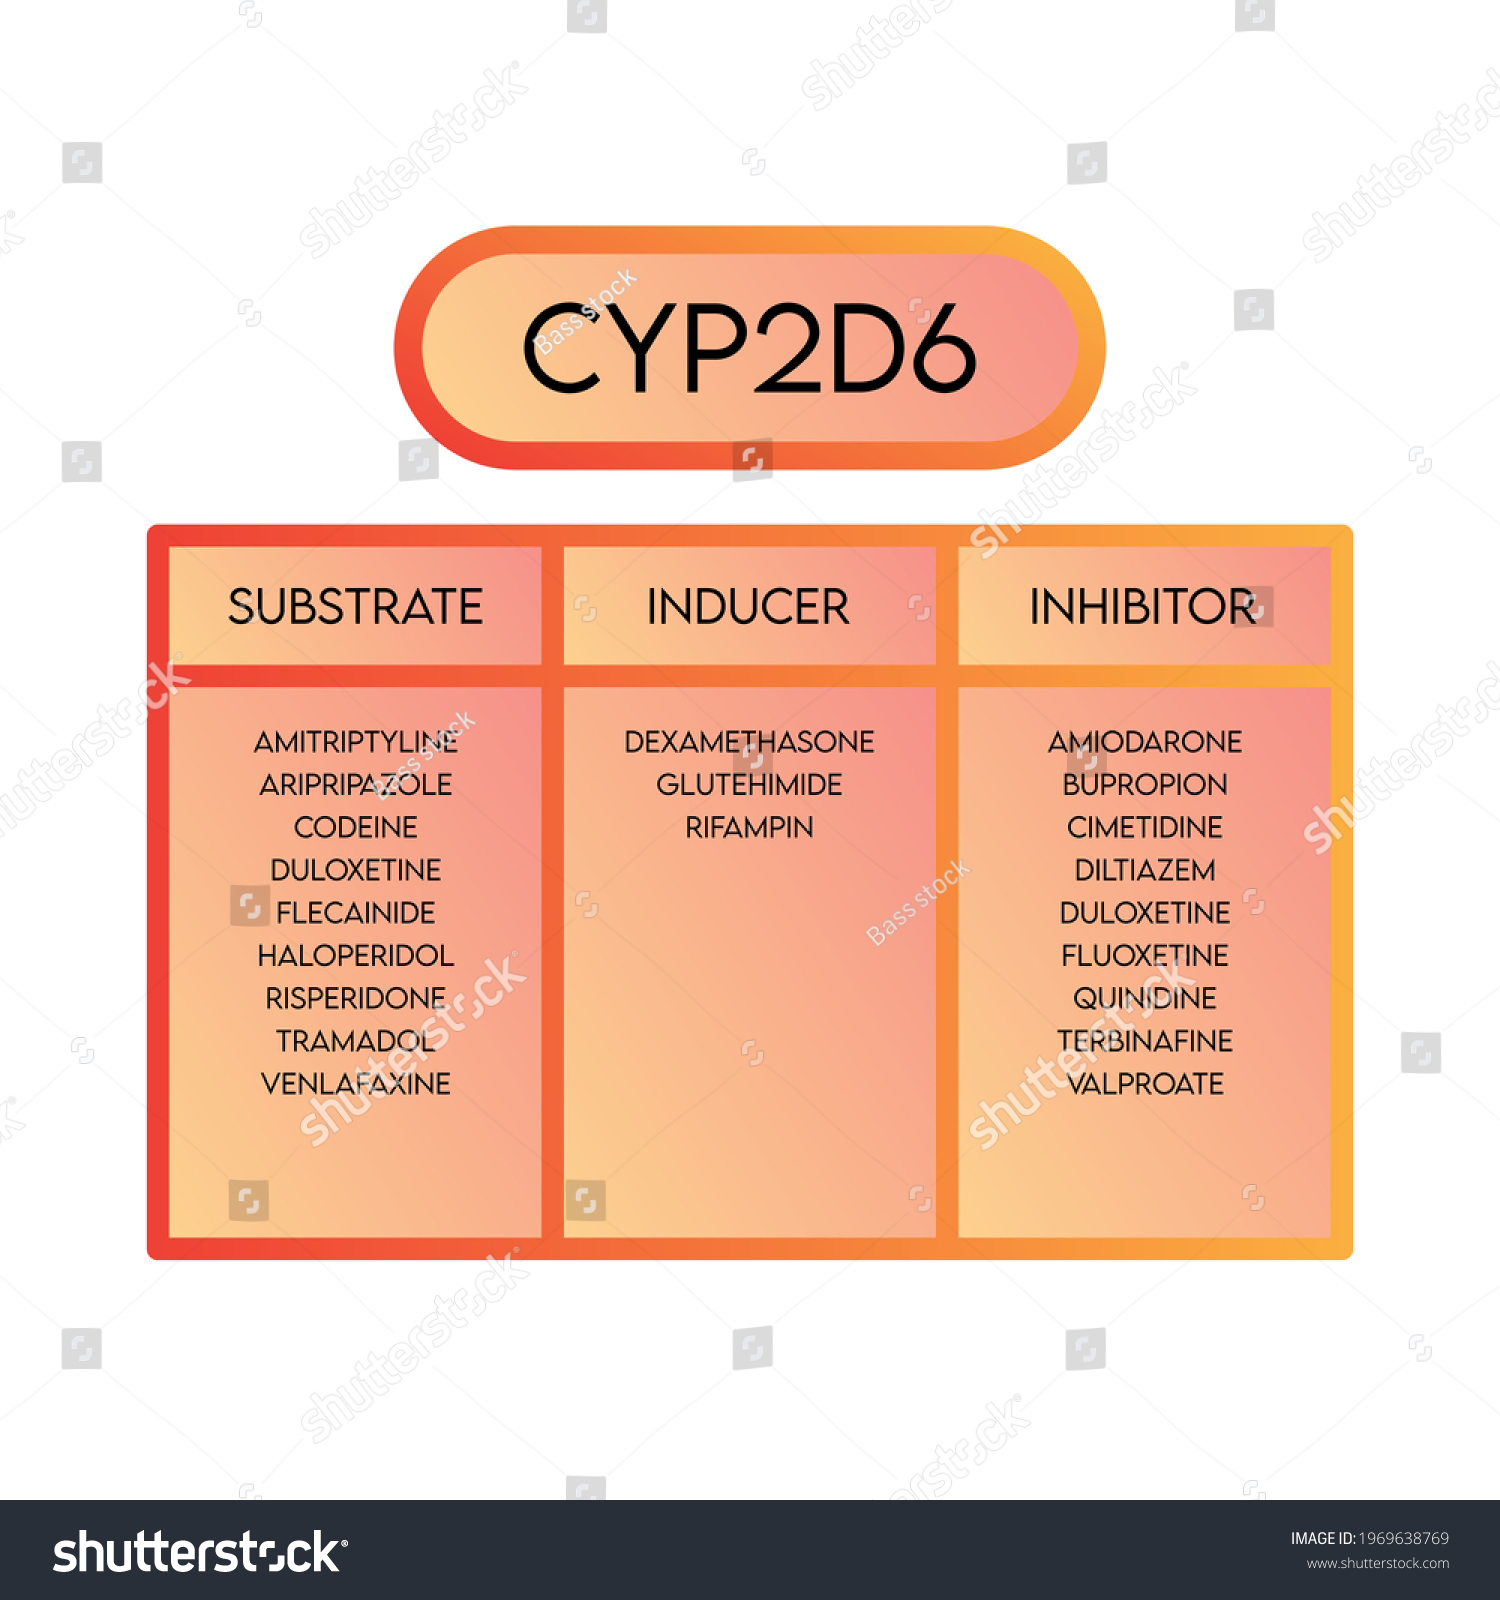 SVG of CYP2D6 Cytochrome P450 enzyme substrates, inducers and inhibitor drug examples for pharmacology, biochemistry svg